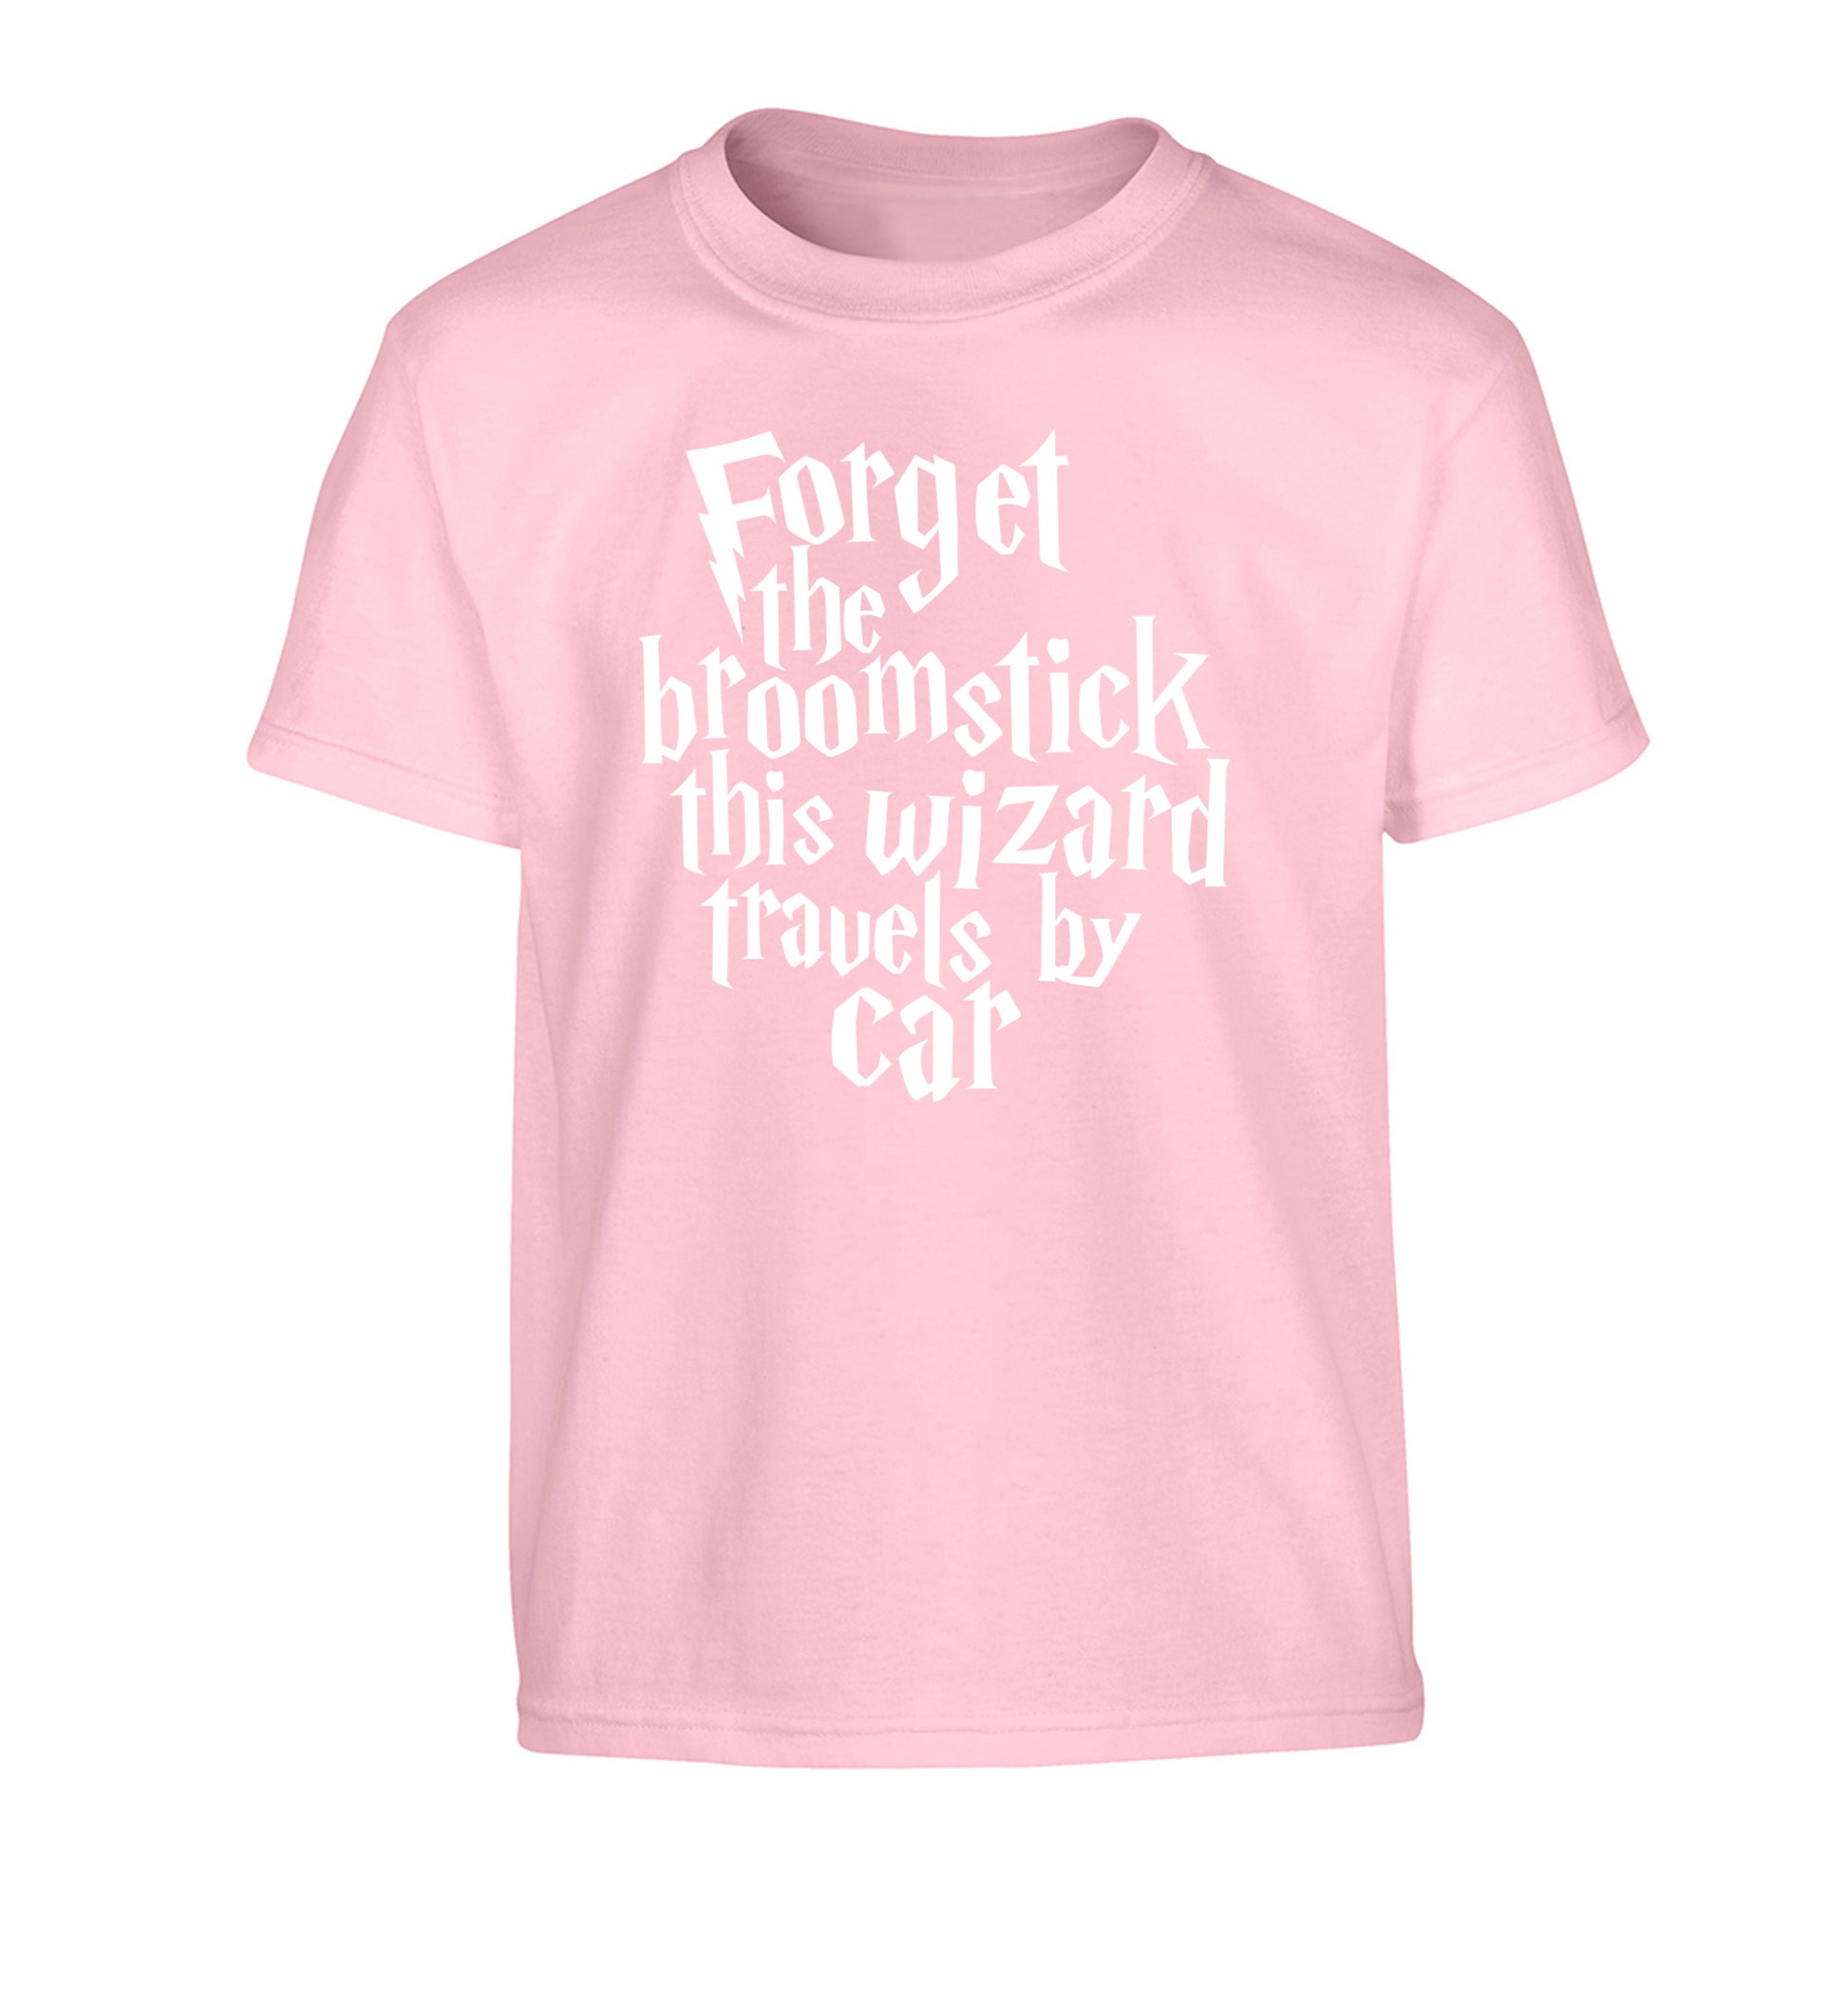 Forget the broomstick this wizard travels by car Children's light pink Tshirt 12-14 Years